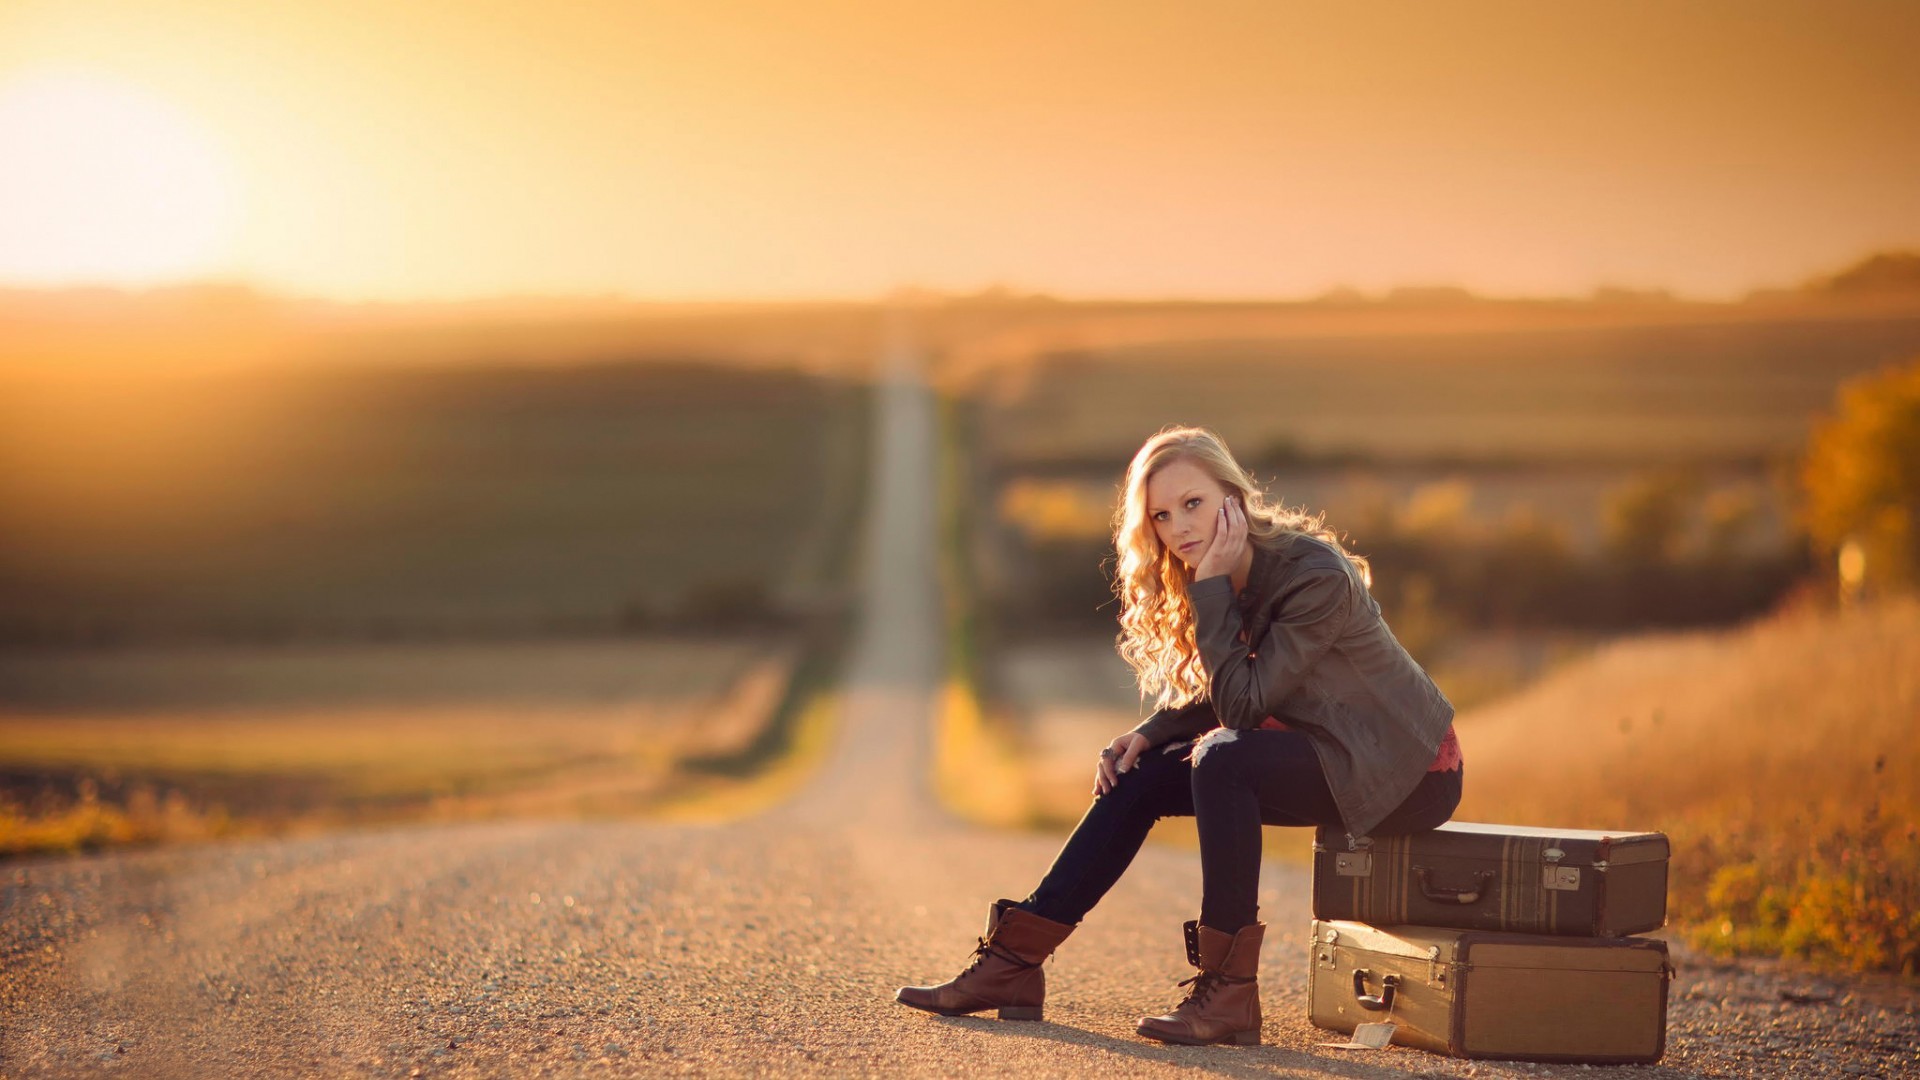 People 1920x1080 women blonde women outdoors road sunset suitcase sitting Jake Olson curly hair jacket outdoors looking at viewer long road model